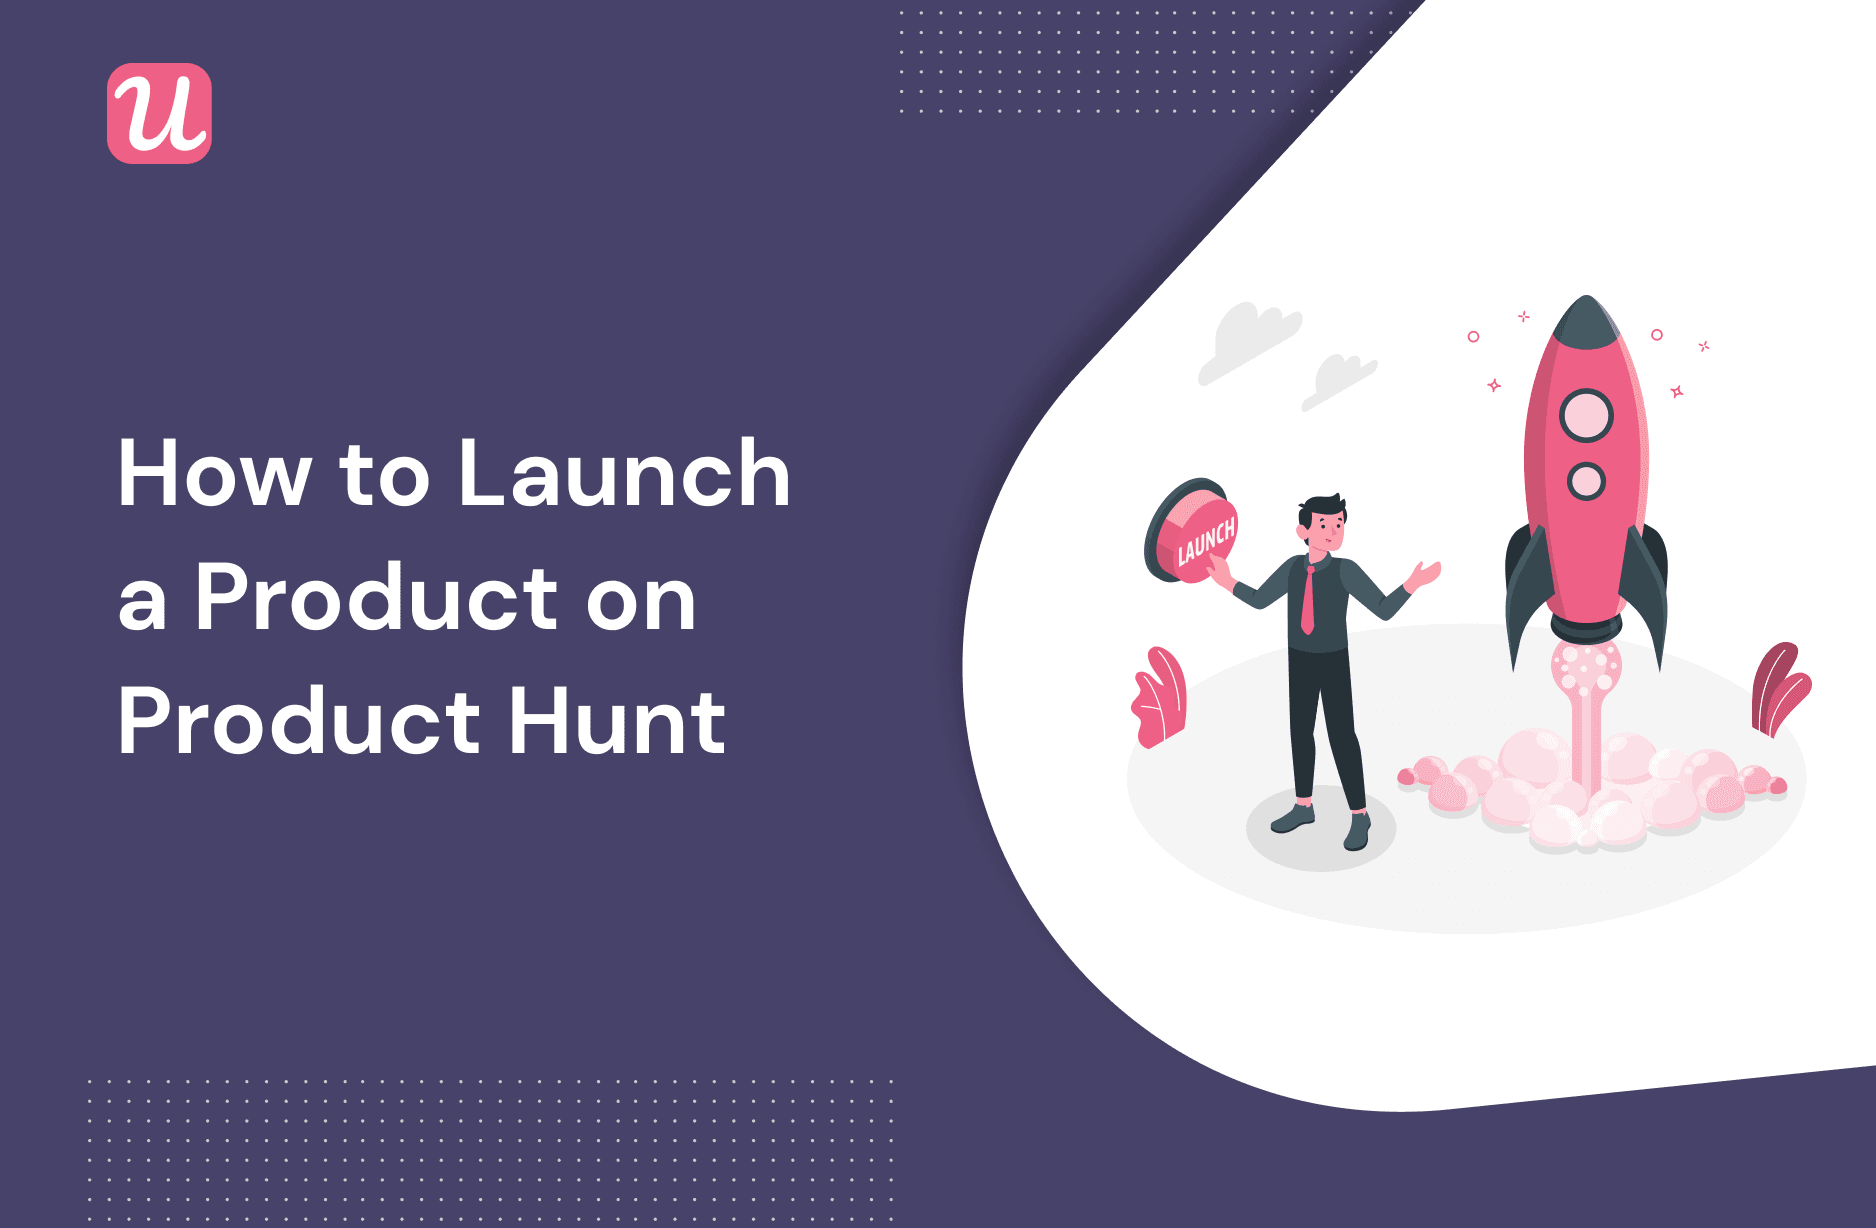 How to Launch a Product on Product Hunt